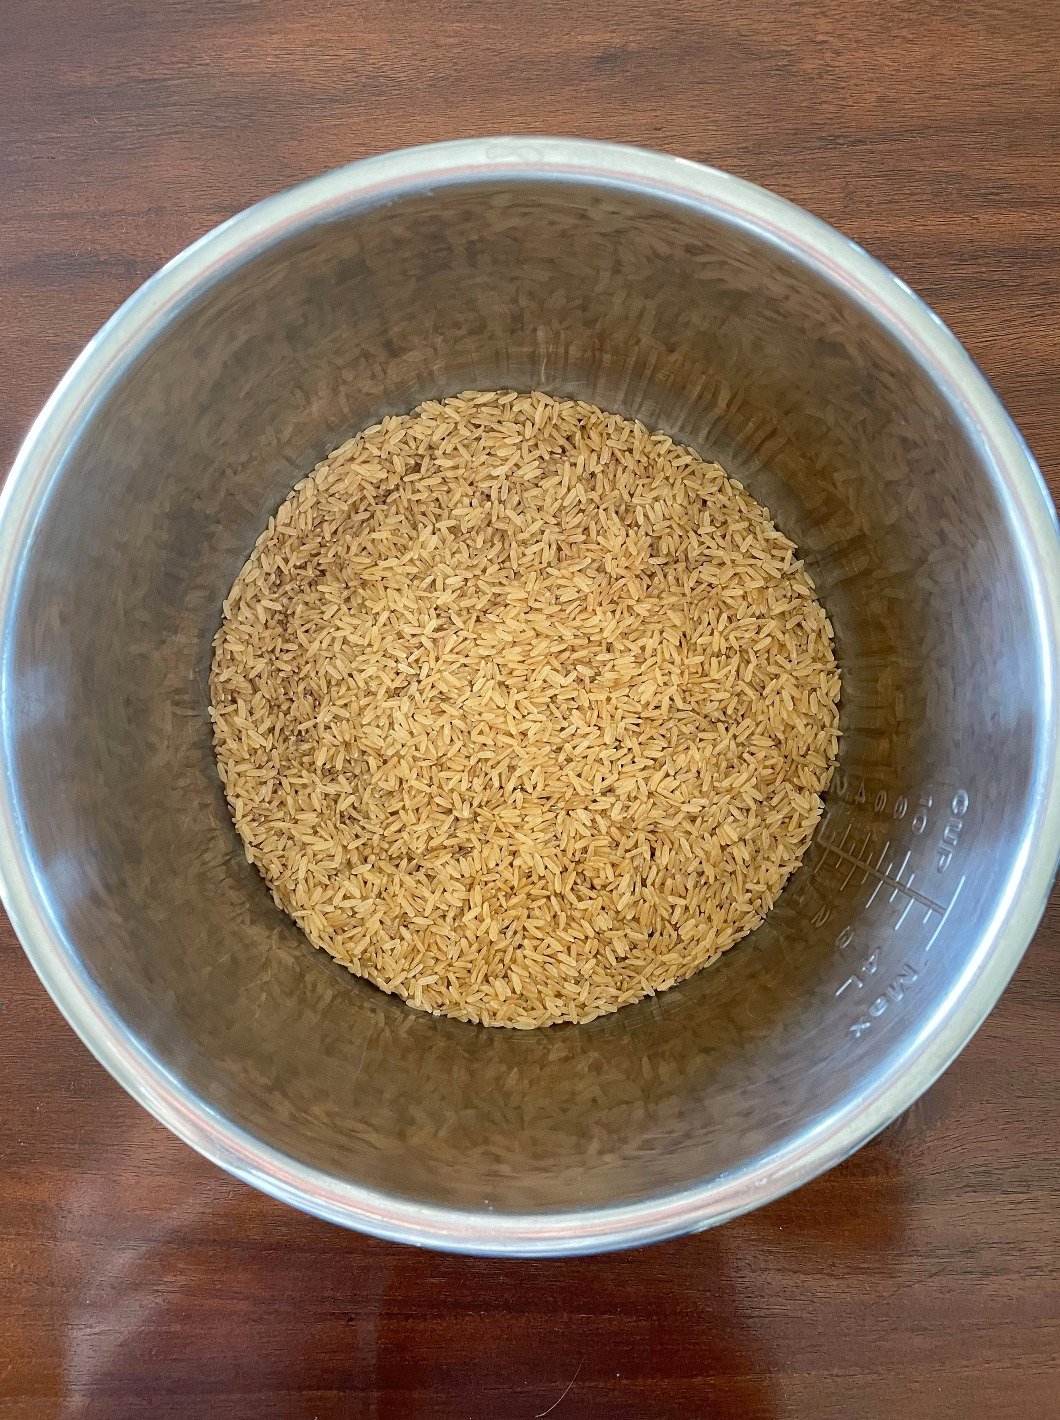 Uncooked brown rice in an instant pot bowl.